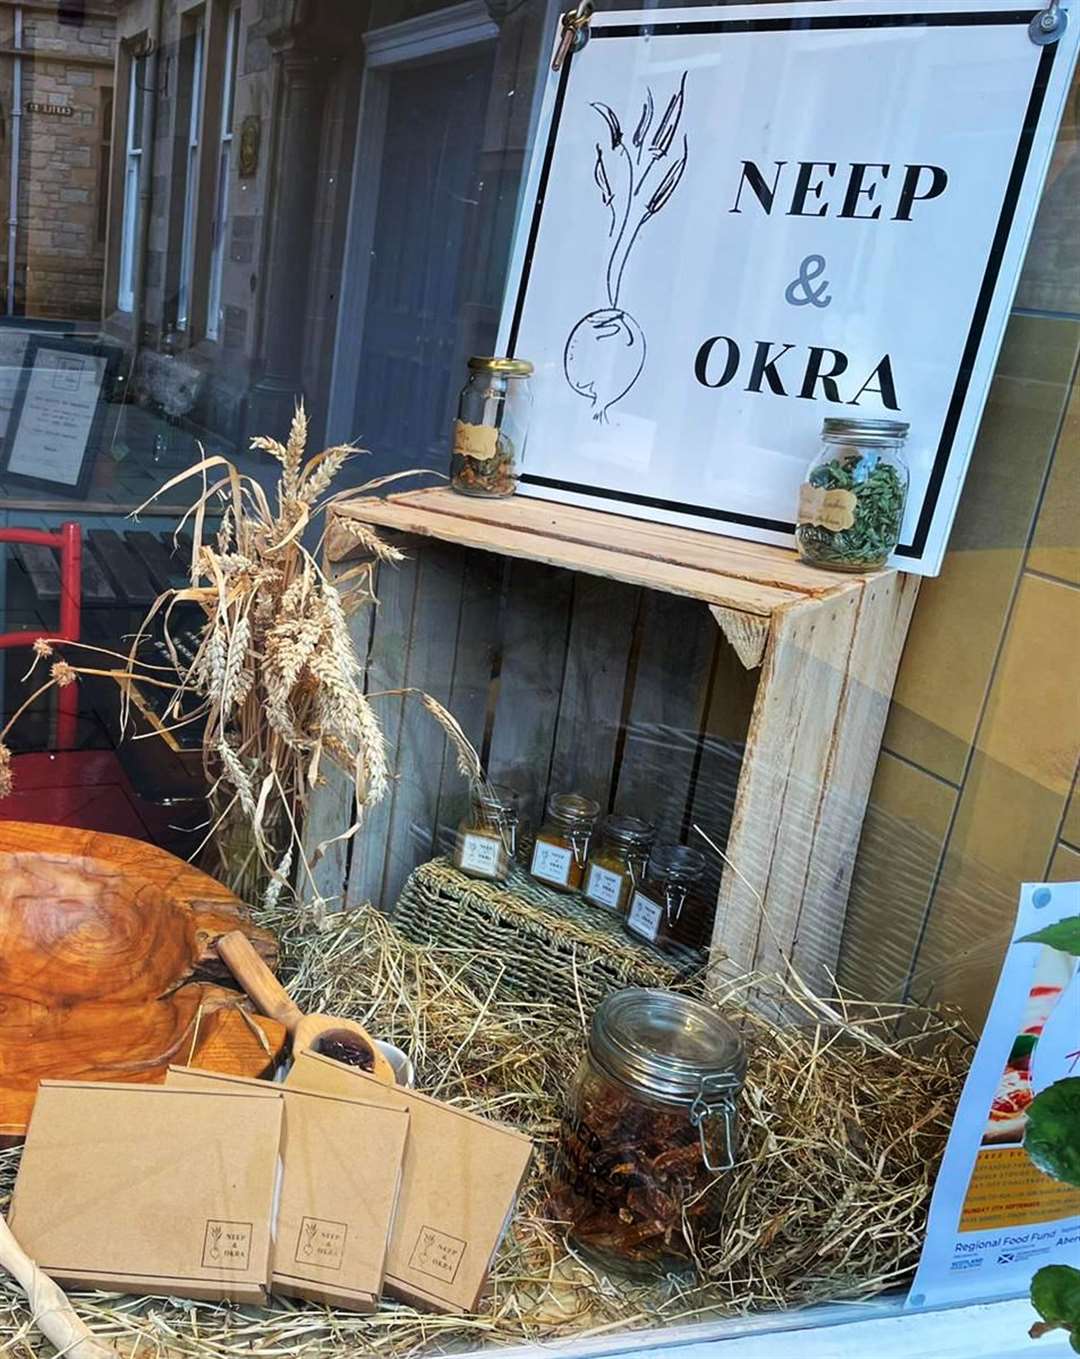 Neep and Okra is one of the businesses with a Hairst themed window display.